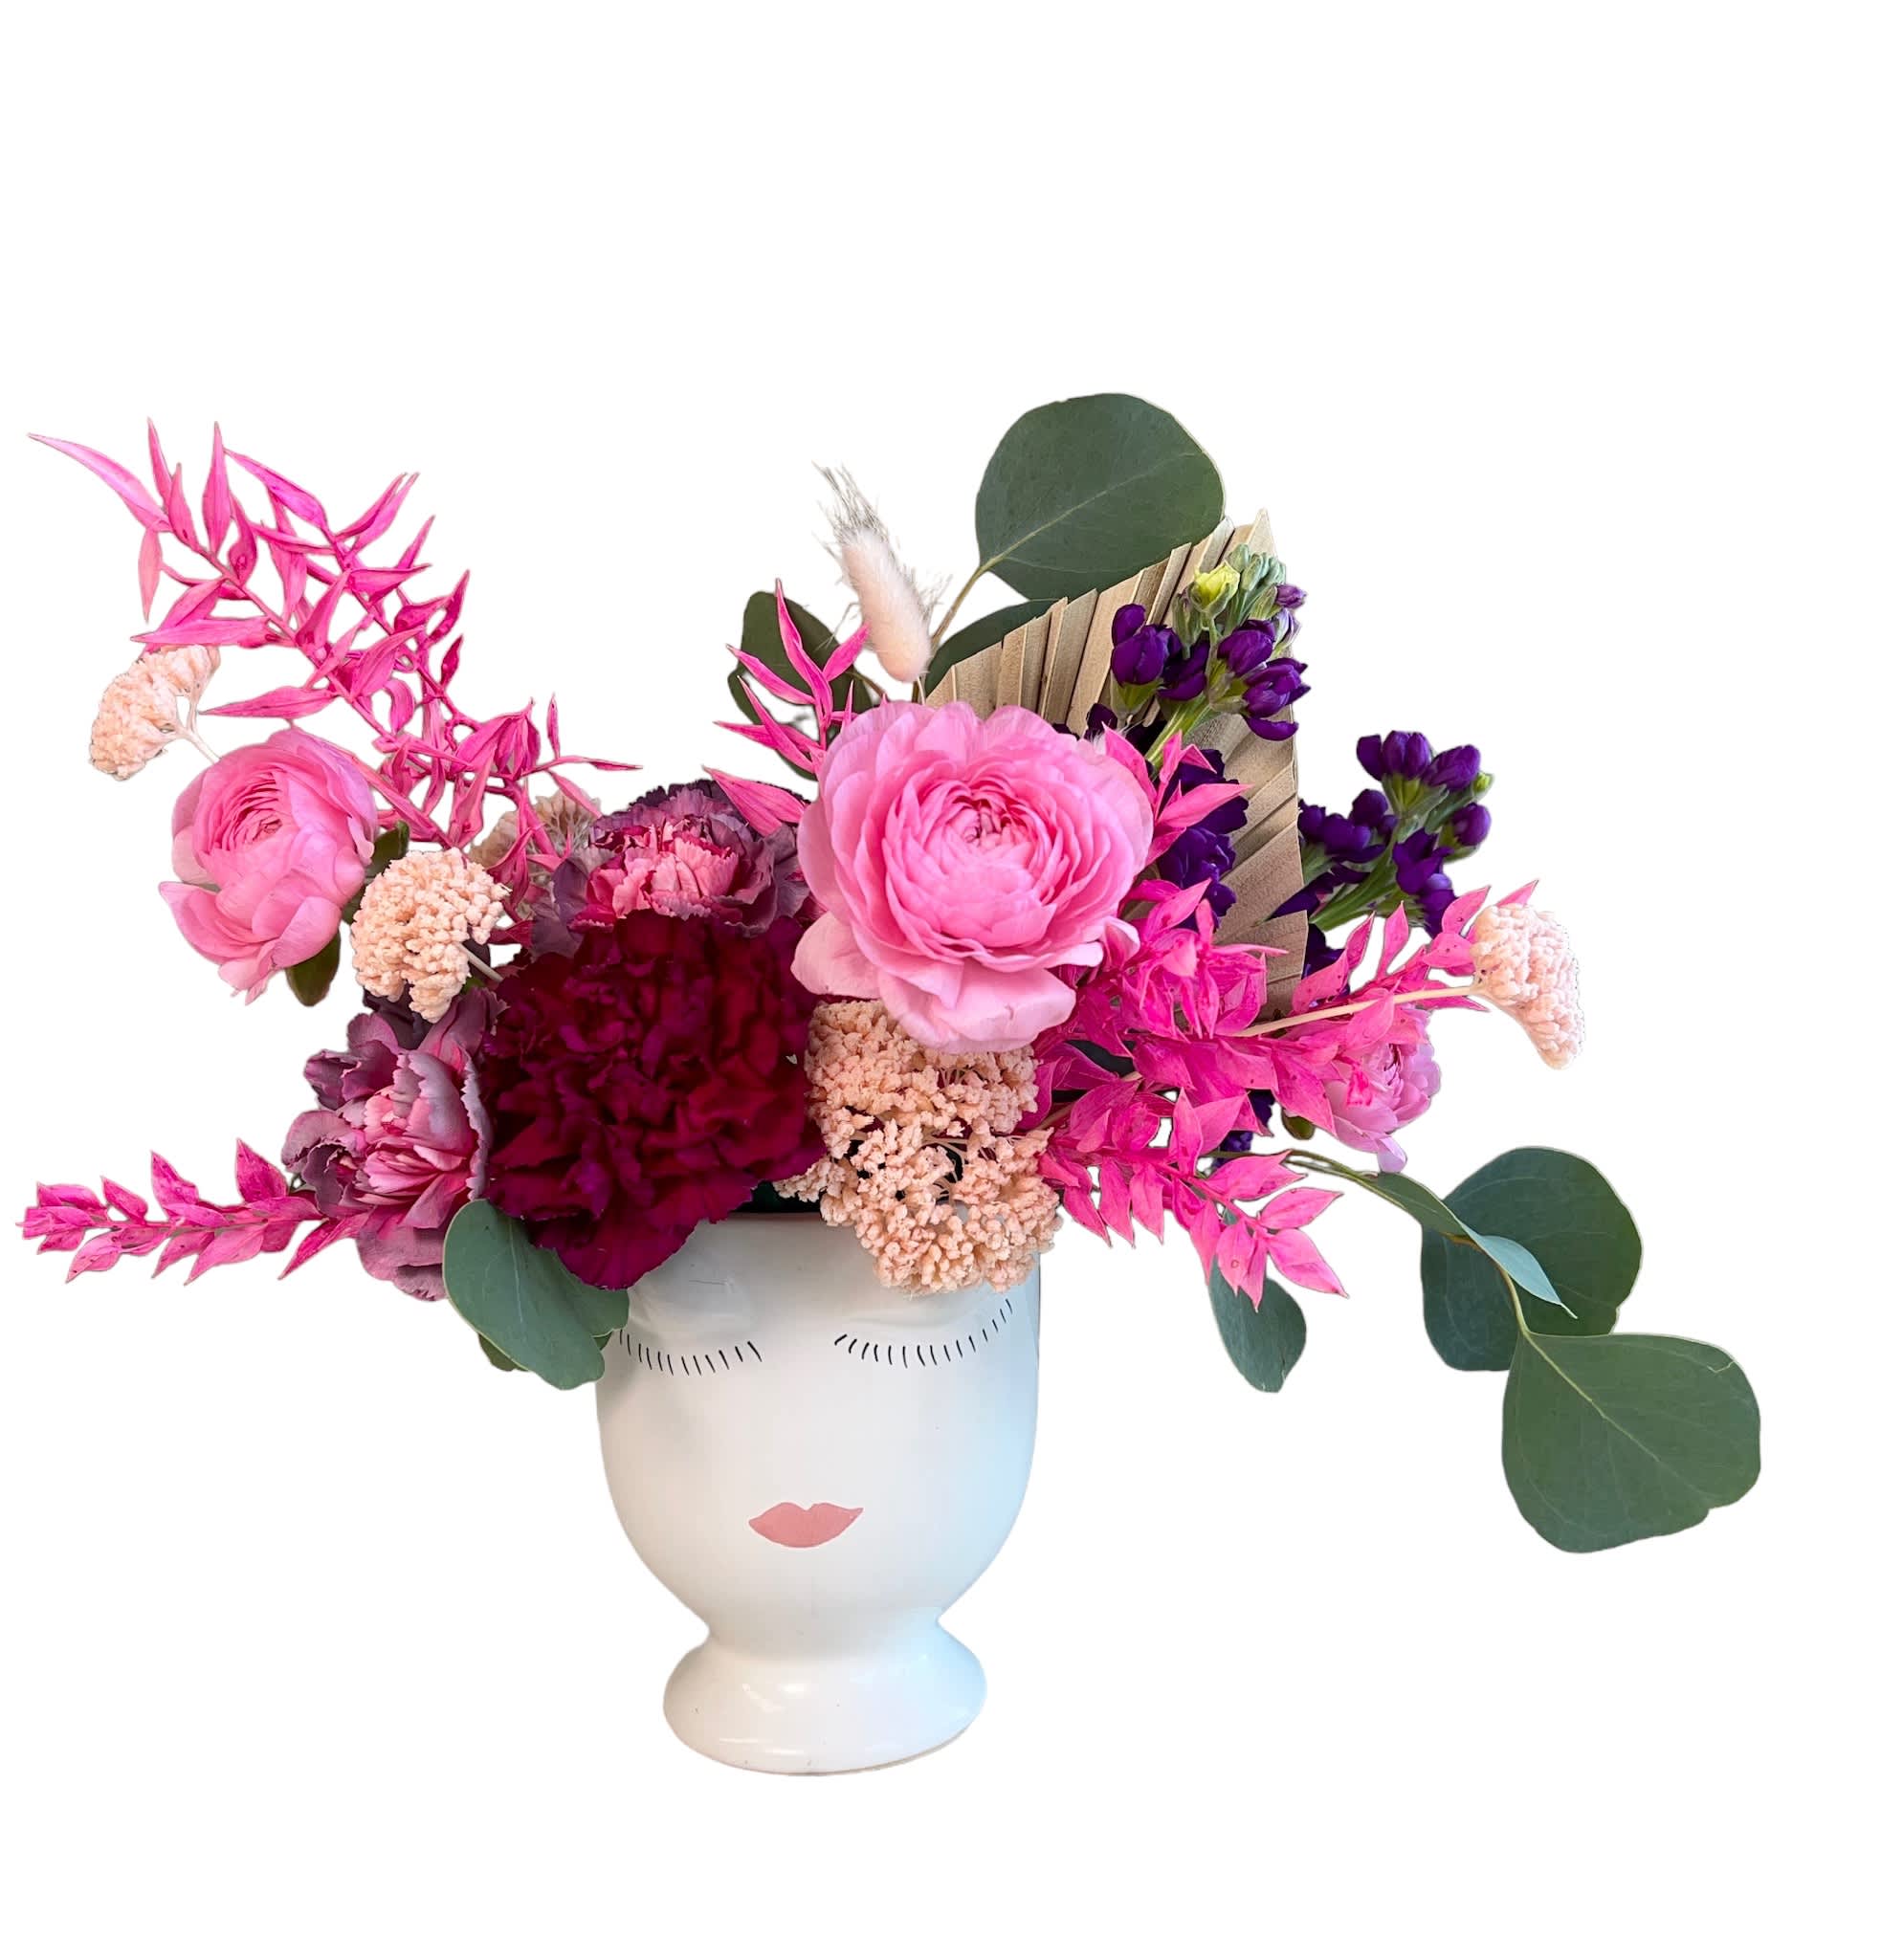 Make Her Happy  - Cutest vase filled with fun and funky colorful blooms